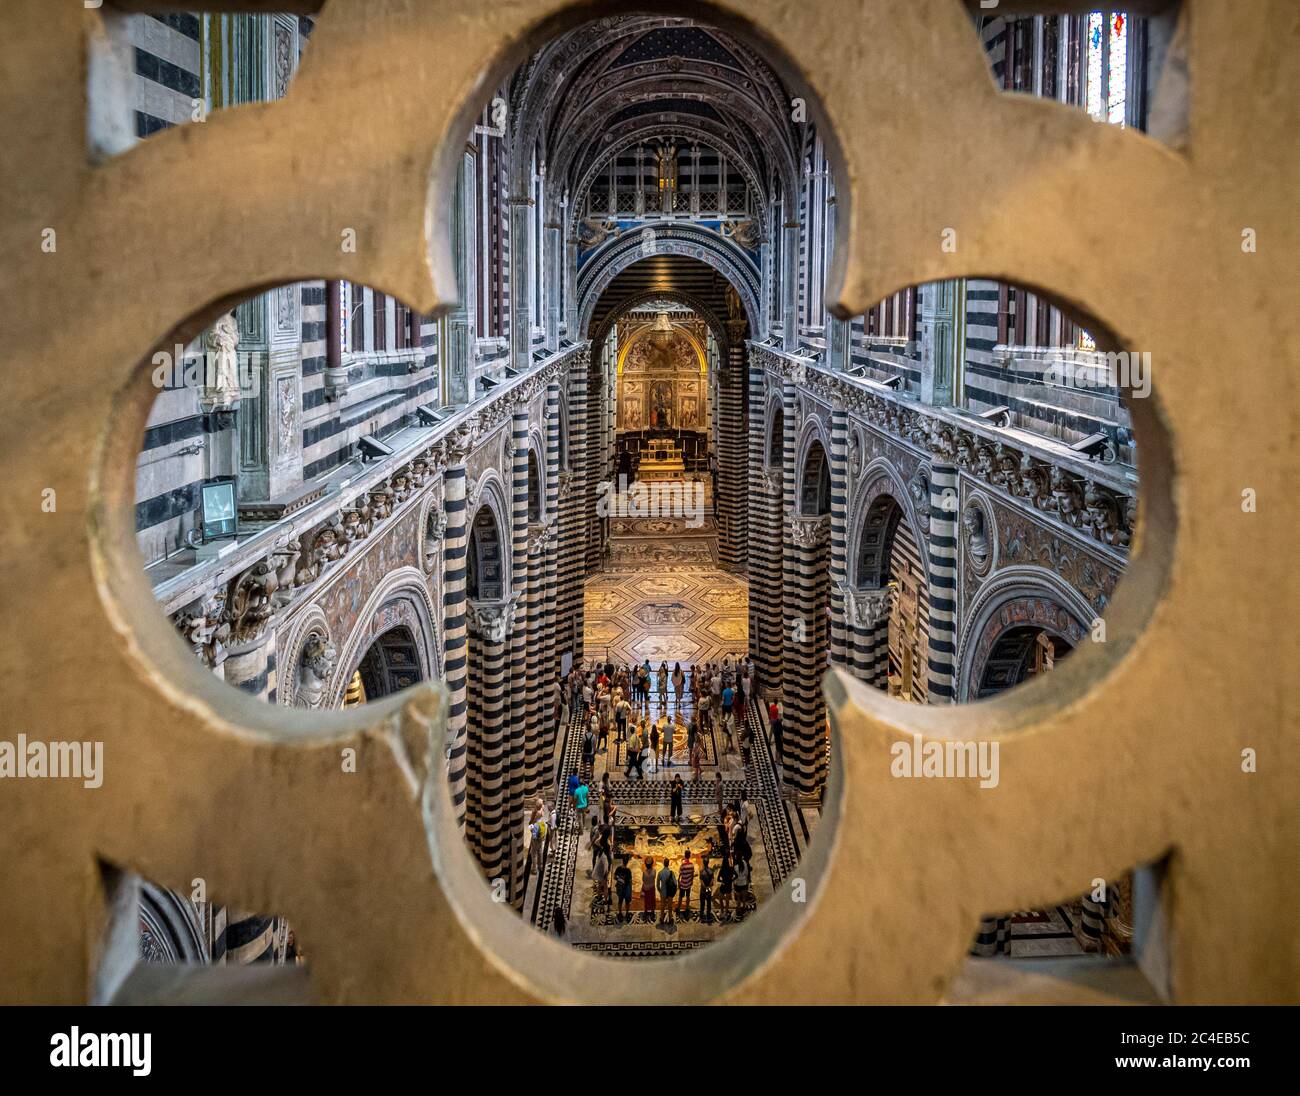 Elevated view of the aisle and altar, shot through a stone balustrade, Siena Cathedral, Italy. Stock Photo